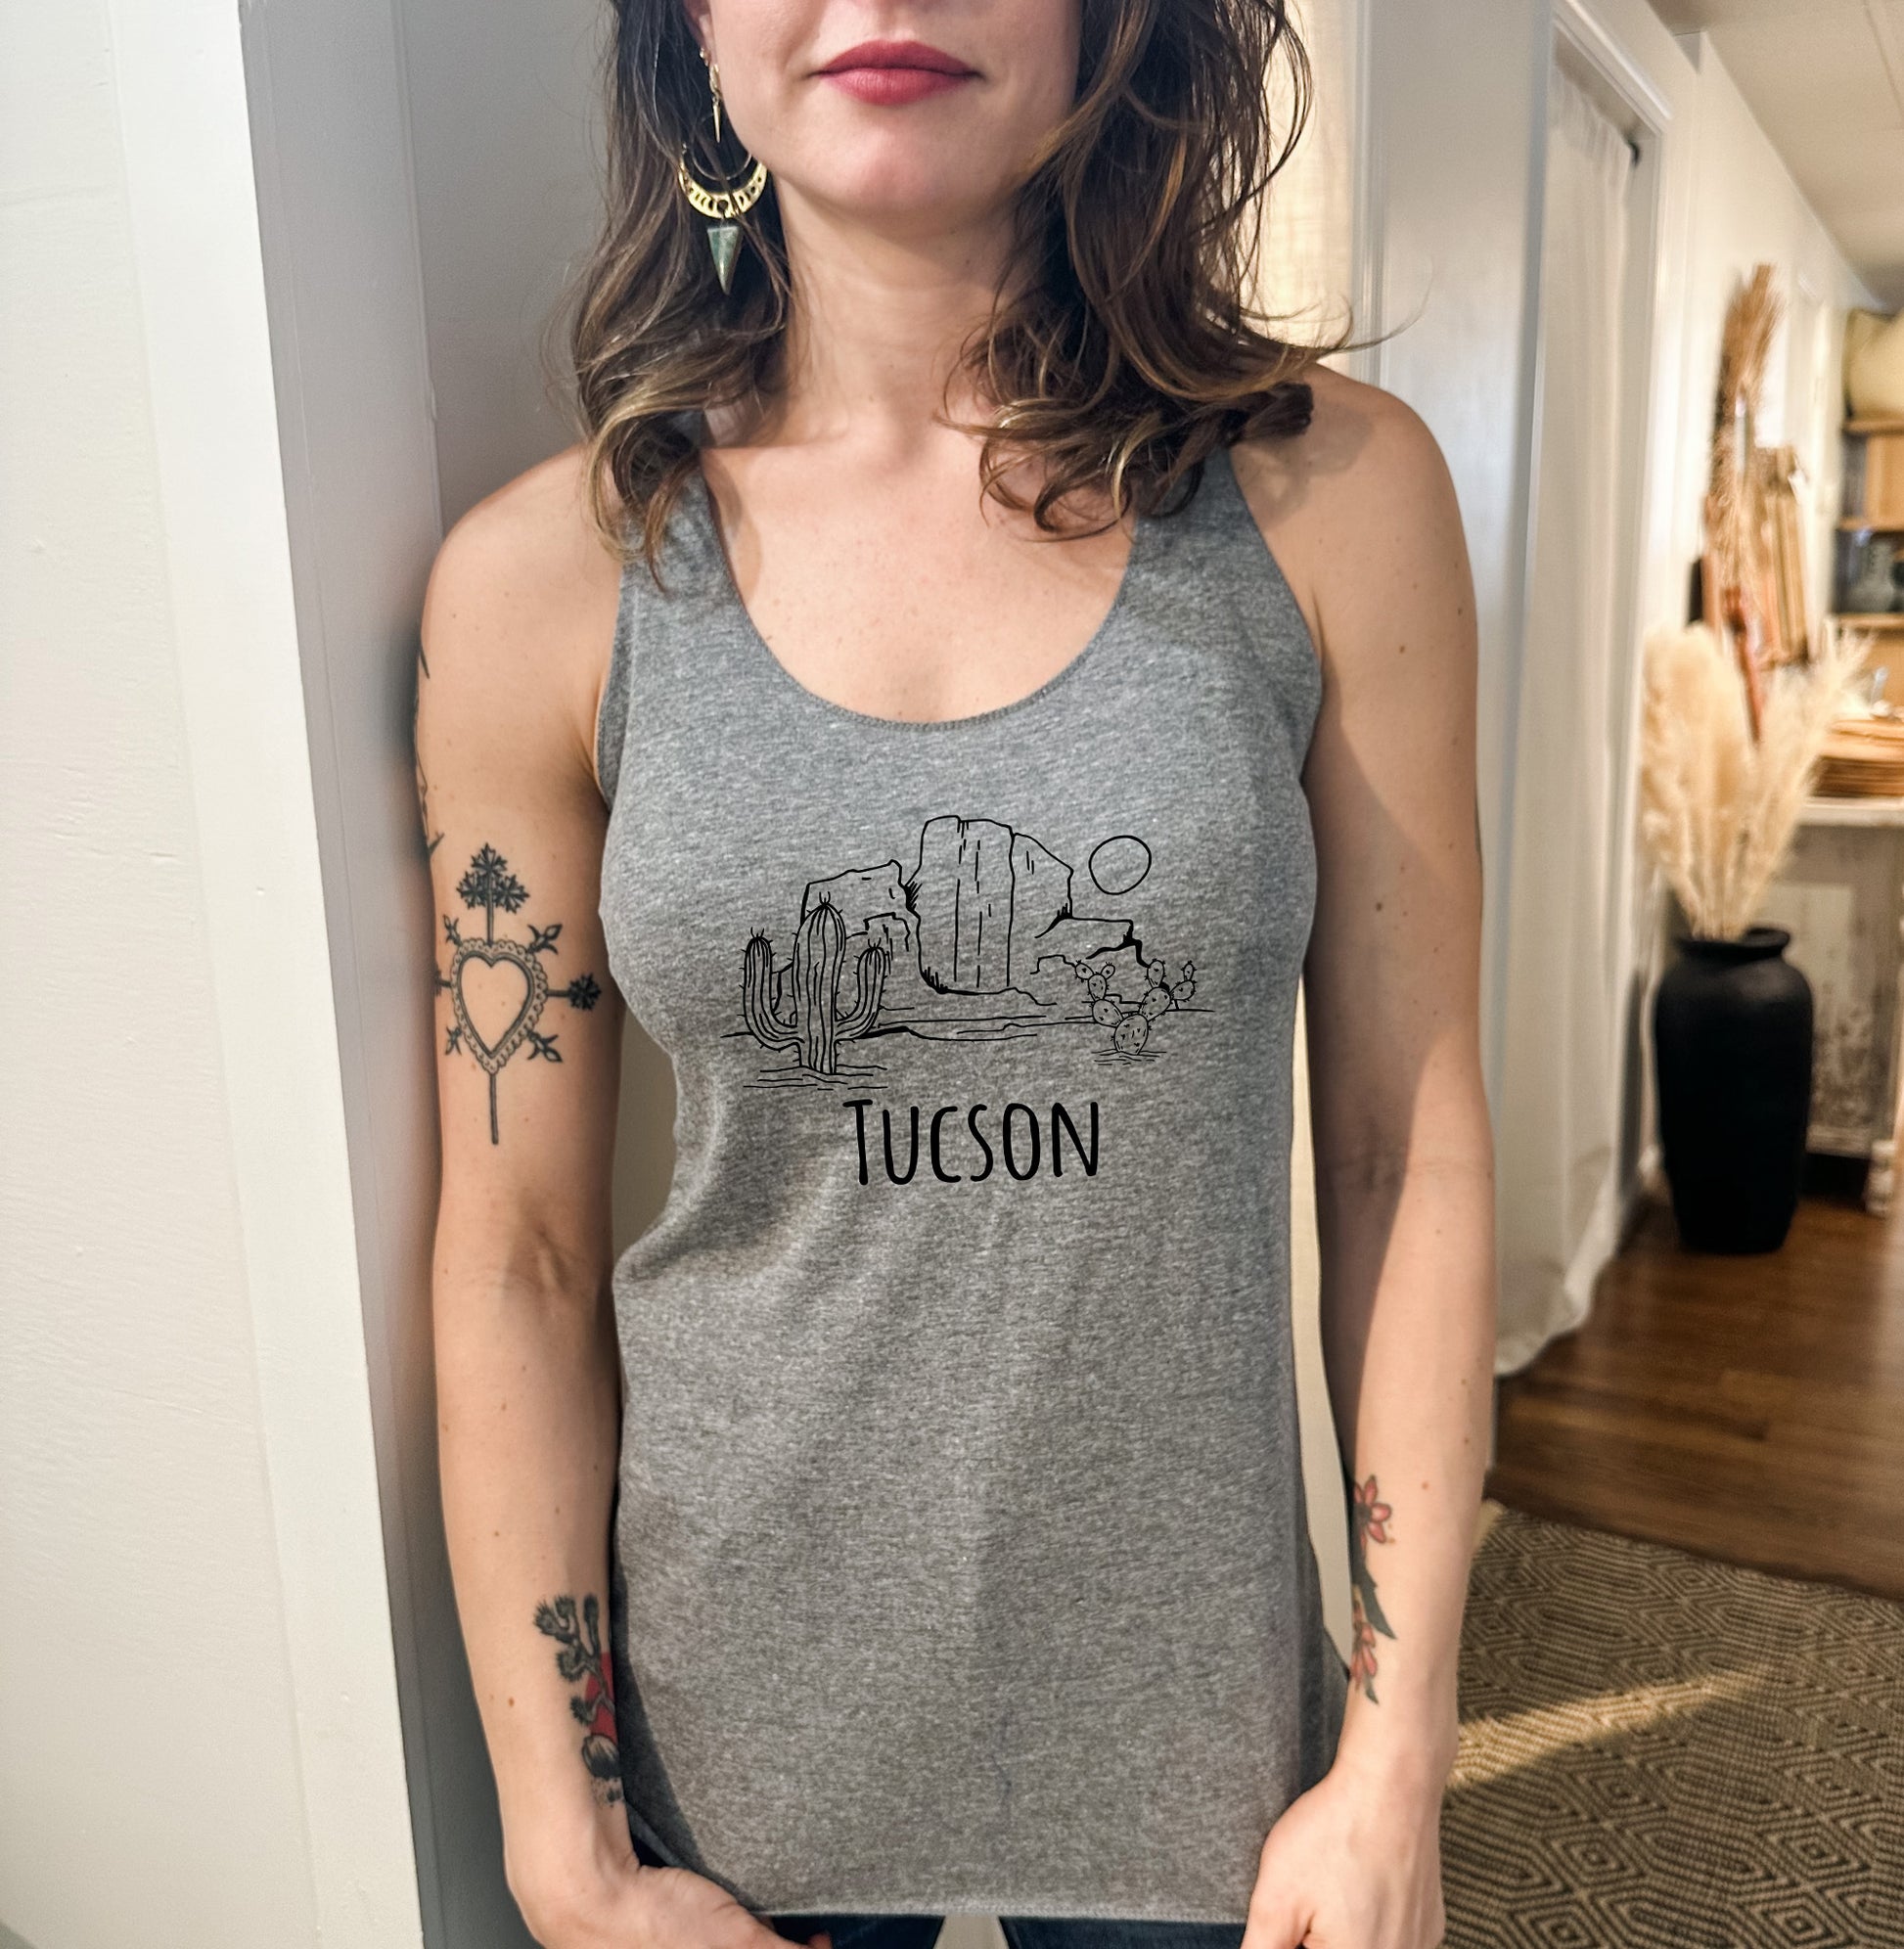 a woman wearing a tank top with a picture of a city on it